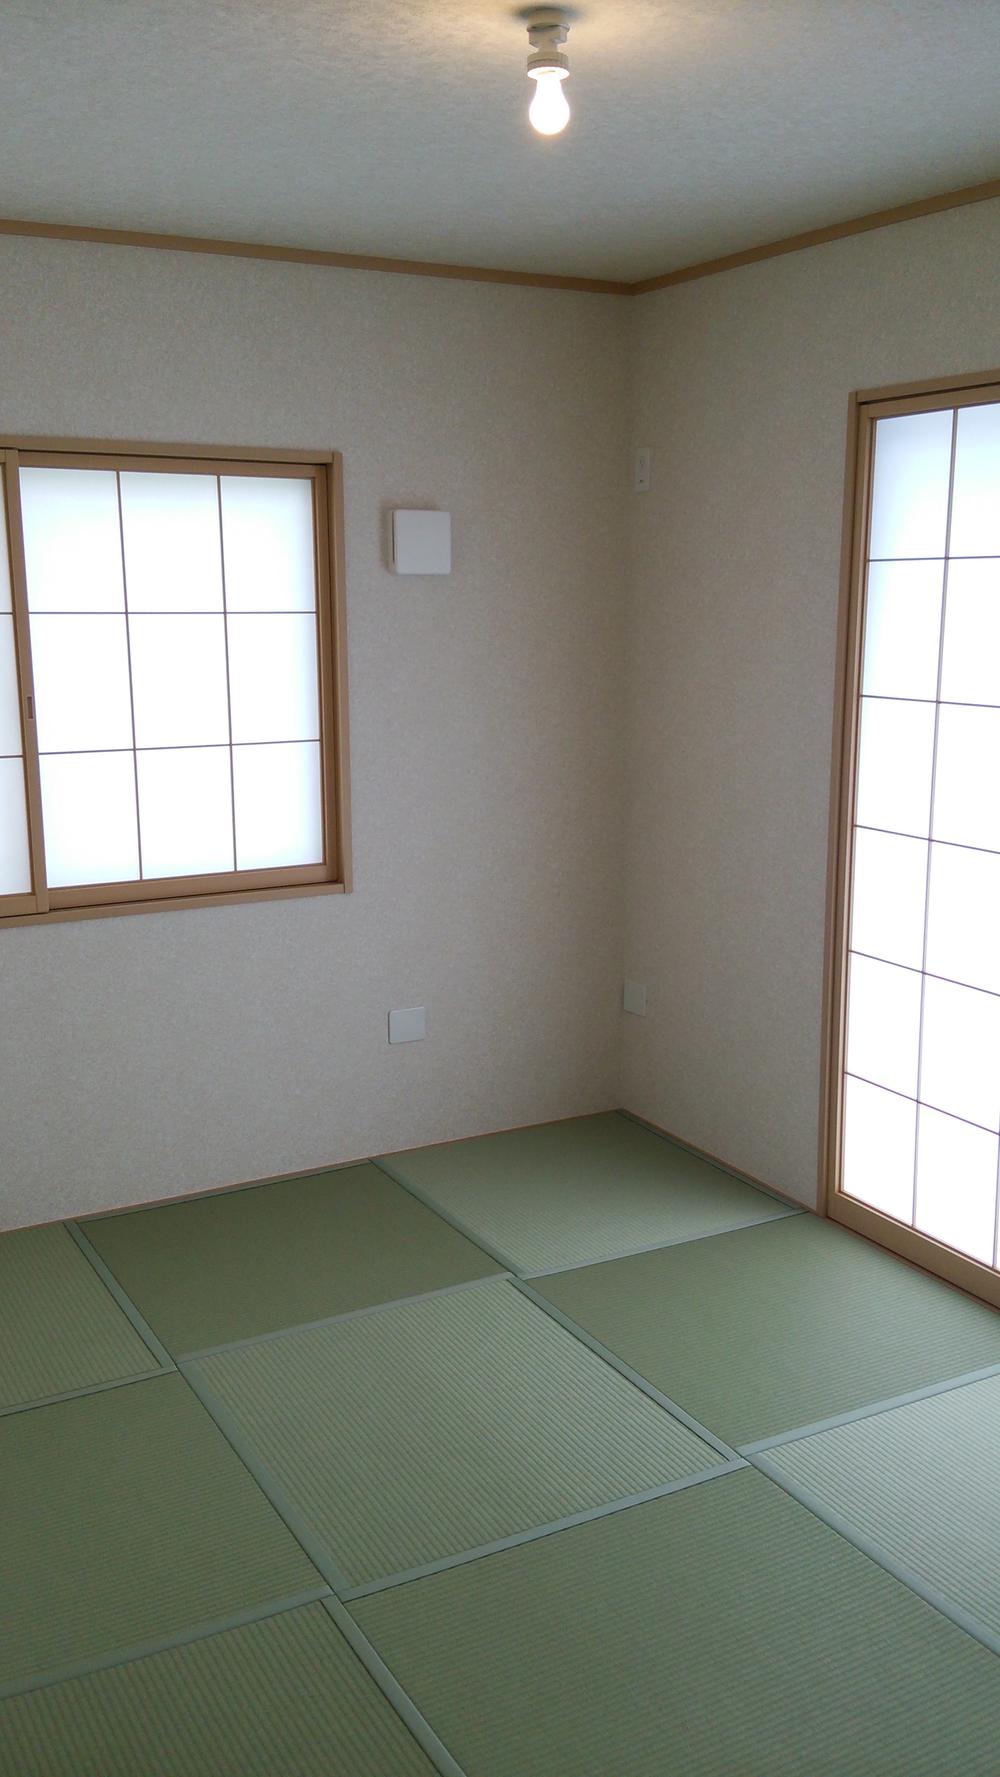 Non-living room. Indoor (11 May 2013) Japanese-style room with a shooting calm.